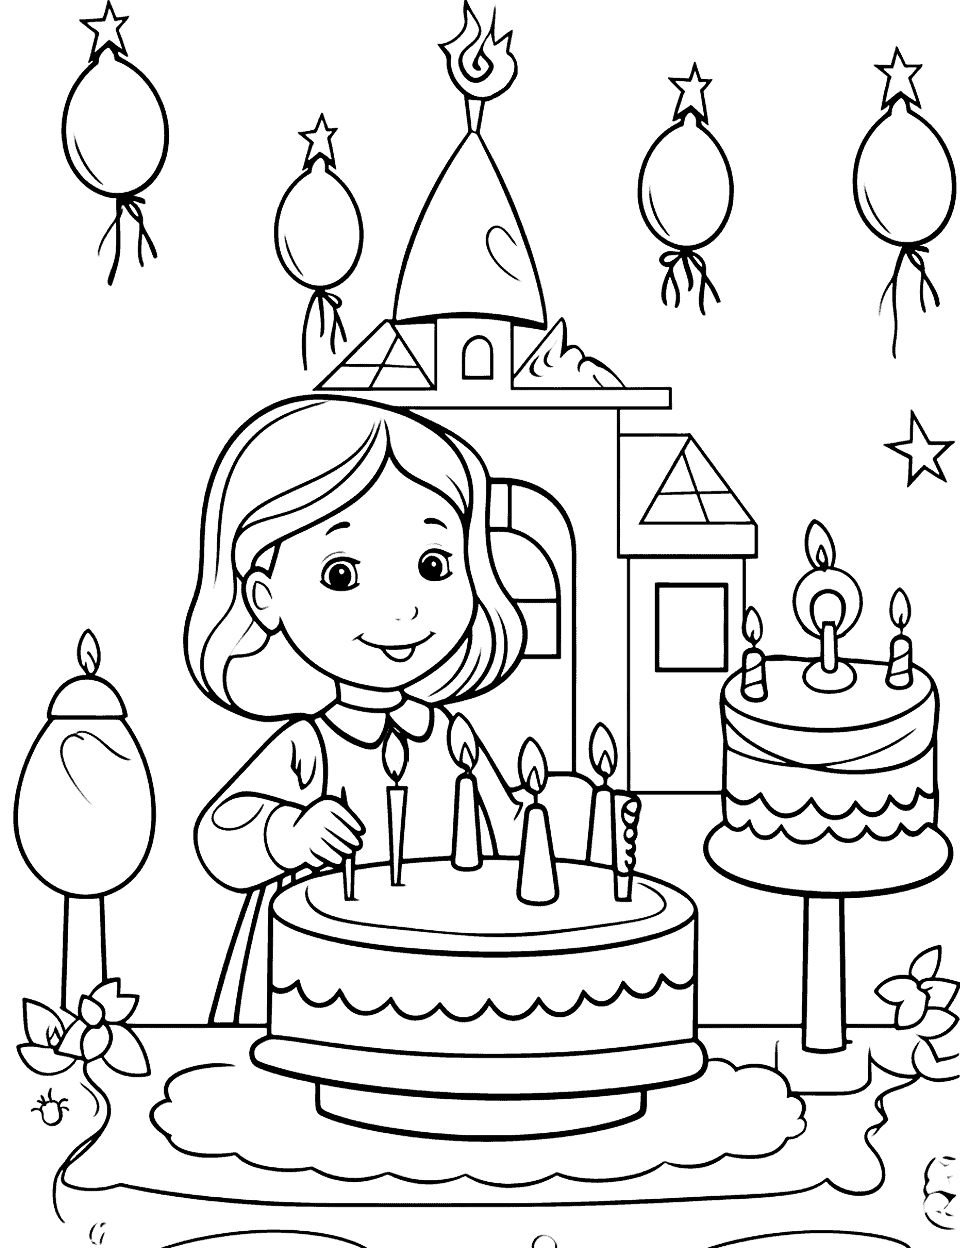 Princess's Royal Birthday Happy Coloring Page - A princess in her castle, preparing to blow out the candles on her large cake.